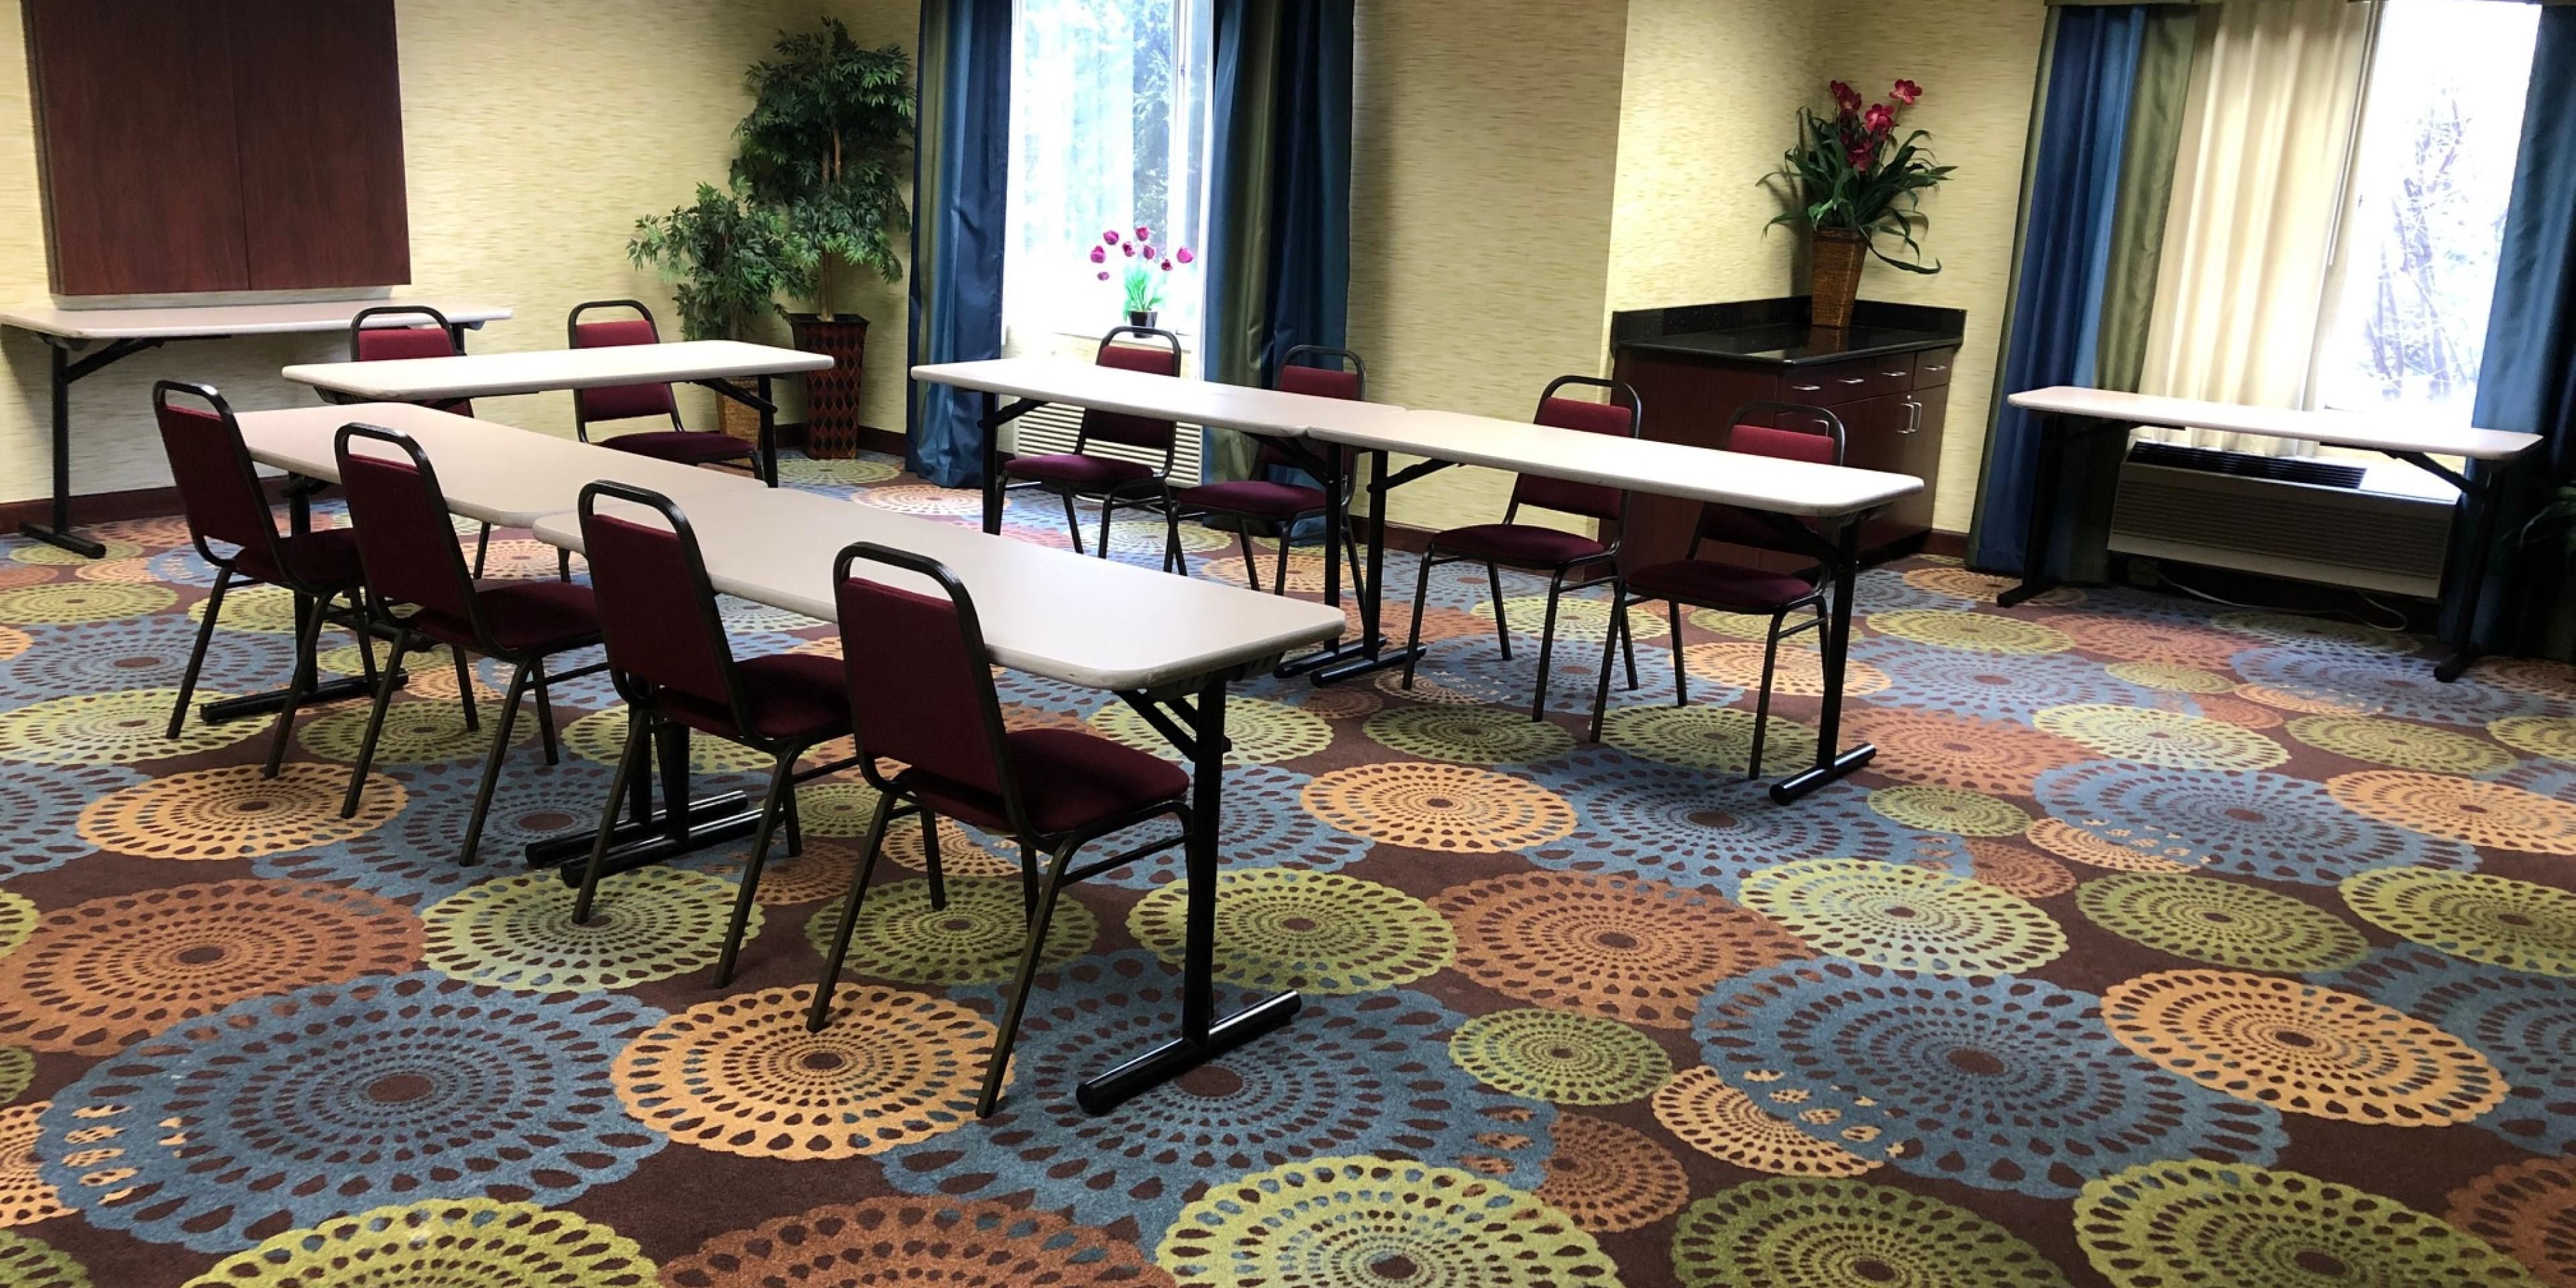 Contact the Holiday Inn Express Lapeer for all of your small meeting needs!  Let us take care of the details so you can be productive. For more information, please contact our sales office.